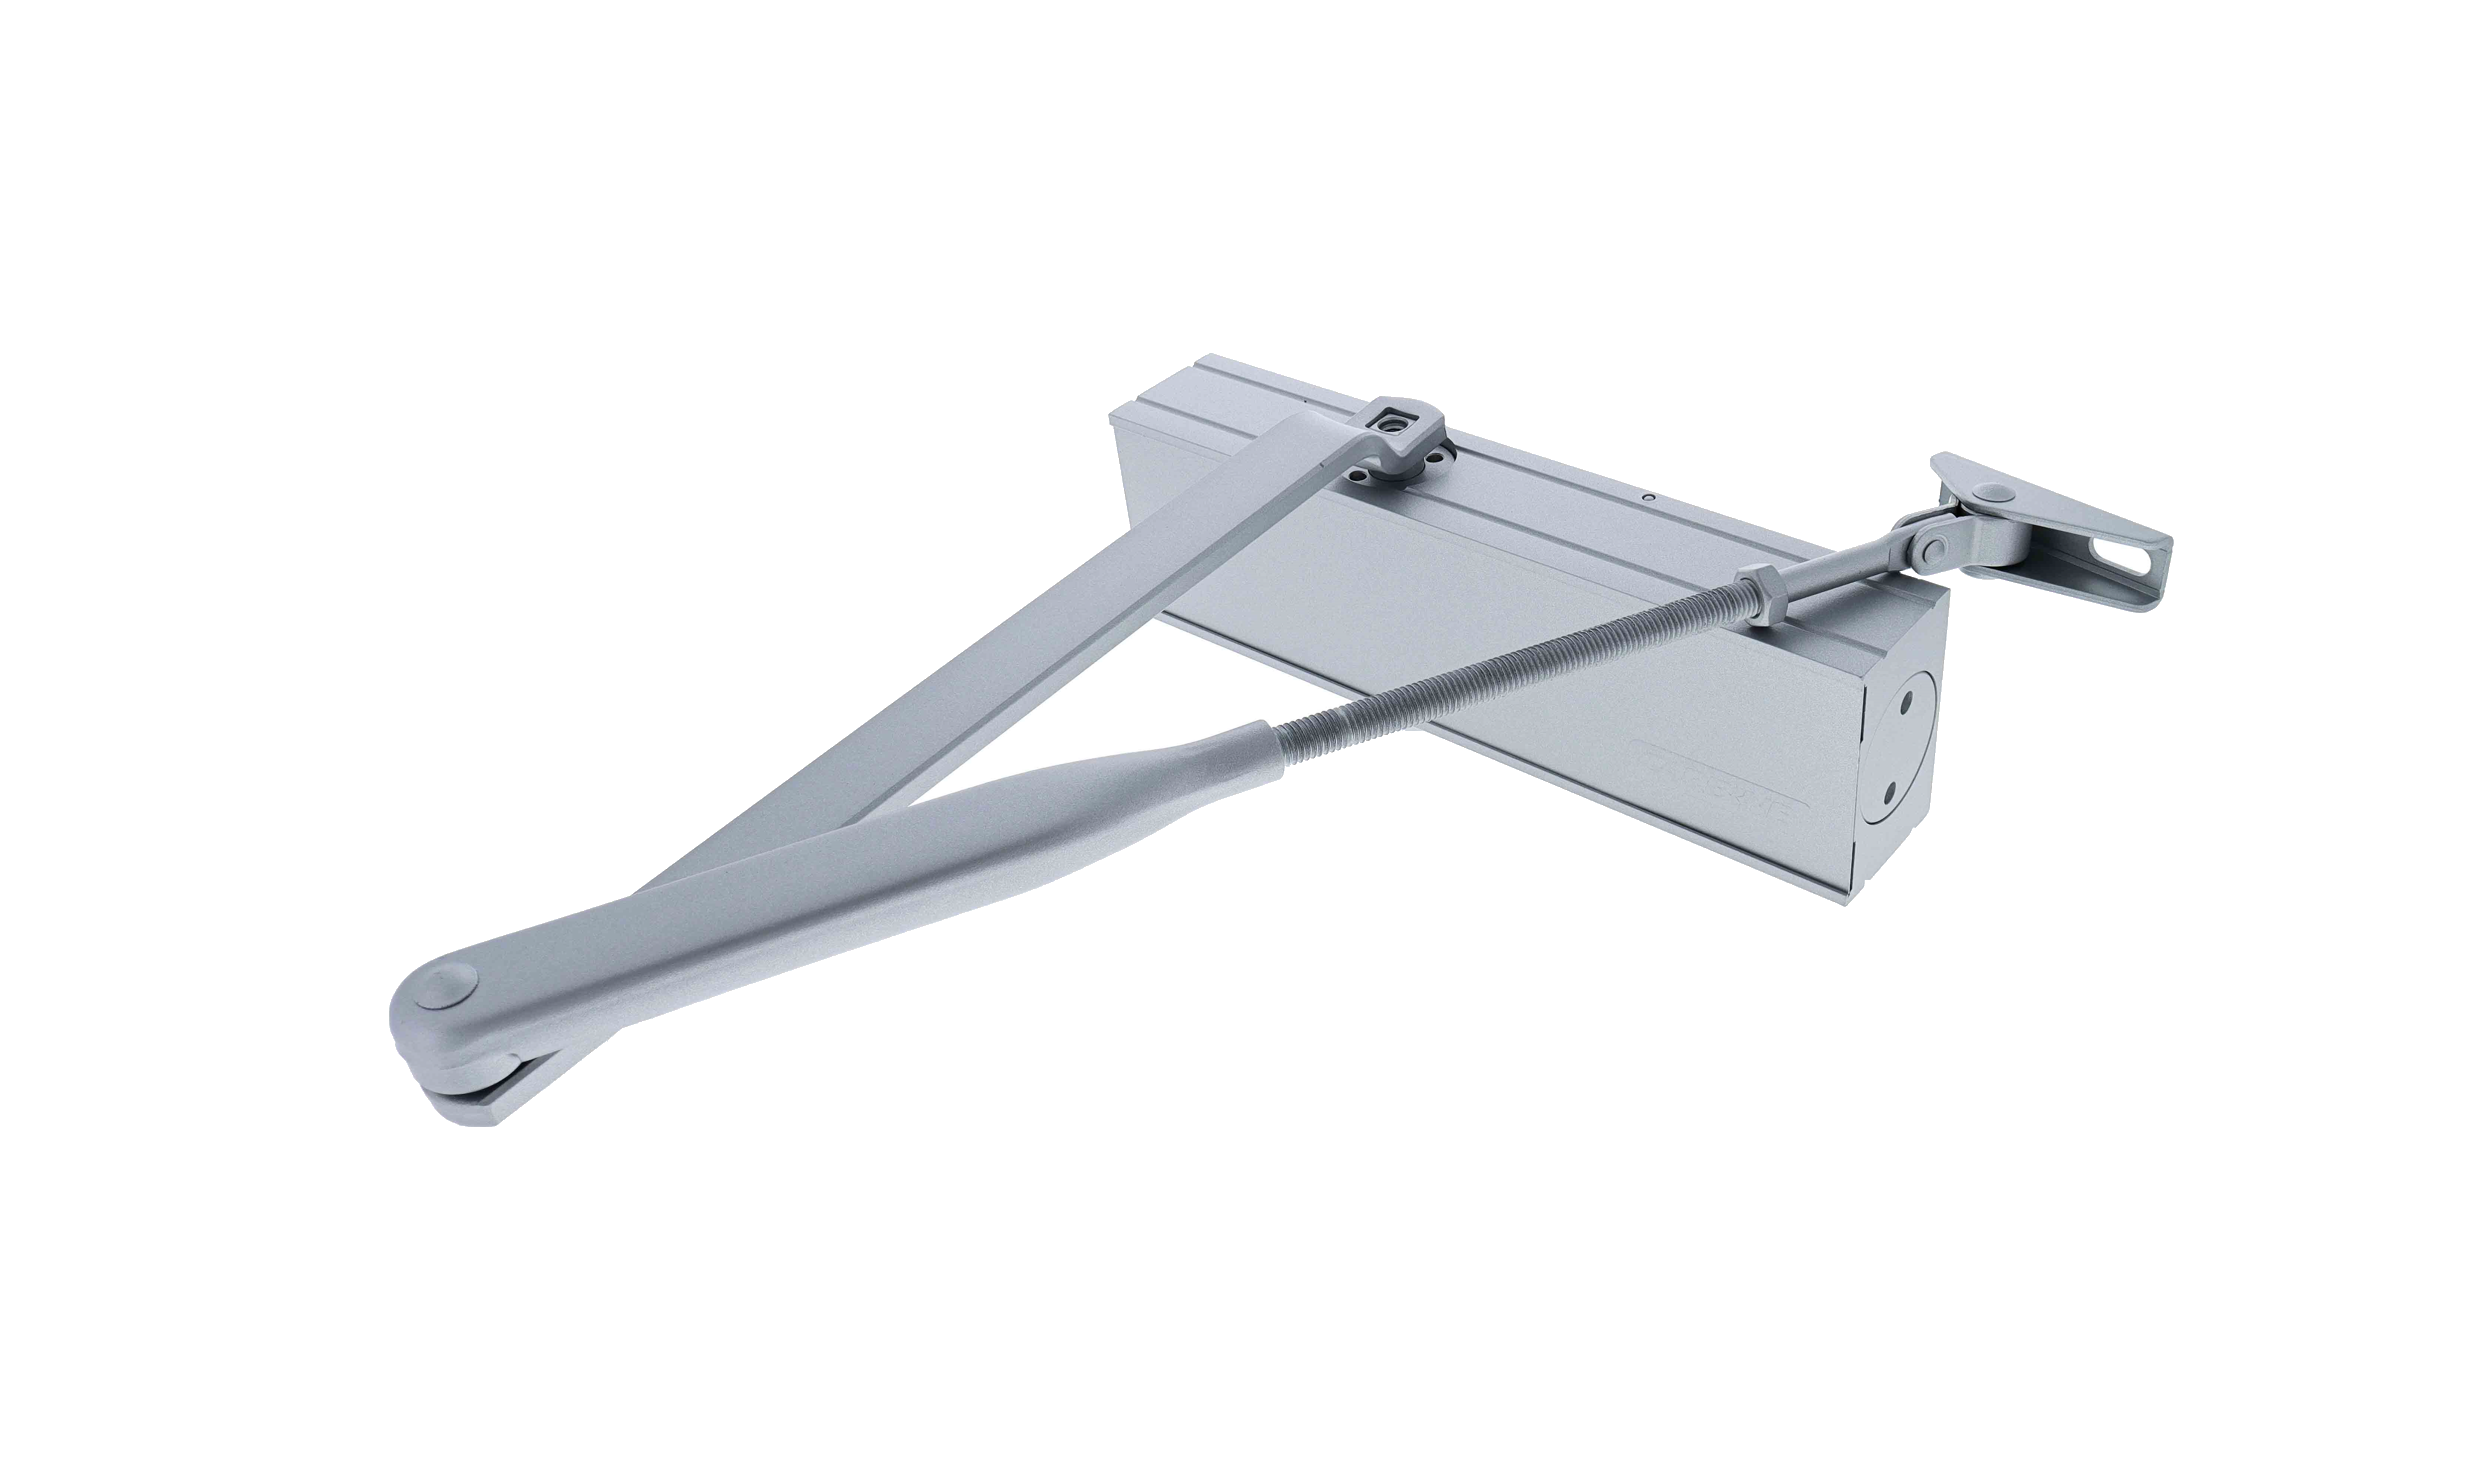 Carbine CDC-5 Radius EN2-6 40kg - 120kg door closer, Silver, with Backcheck and delayed action - Premium Door Hardware from CARBINE - Shop now at Firebox Australia